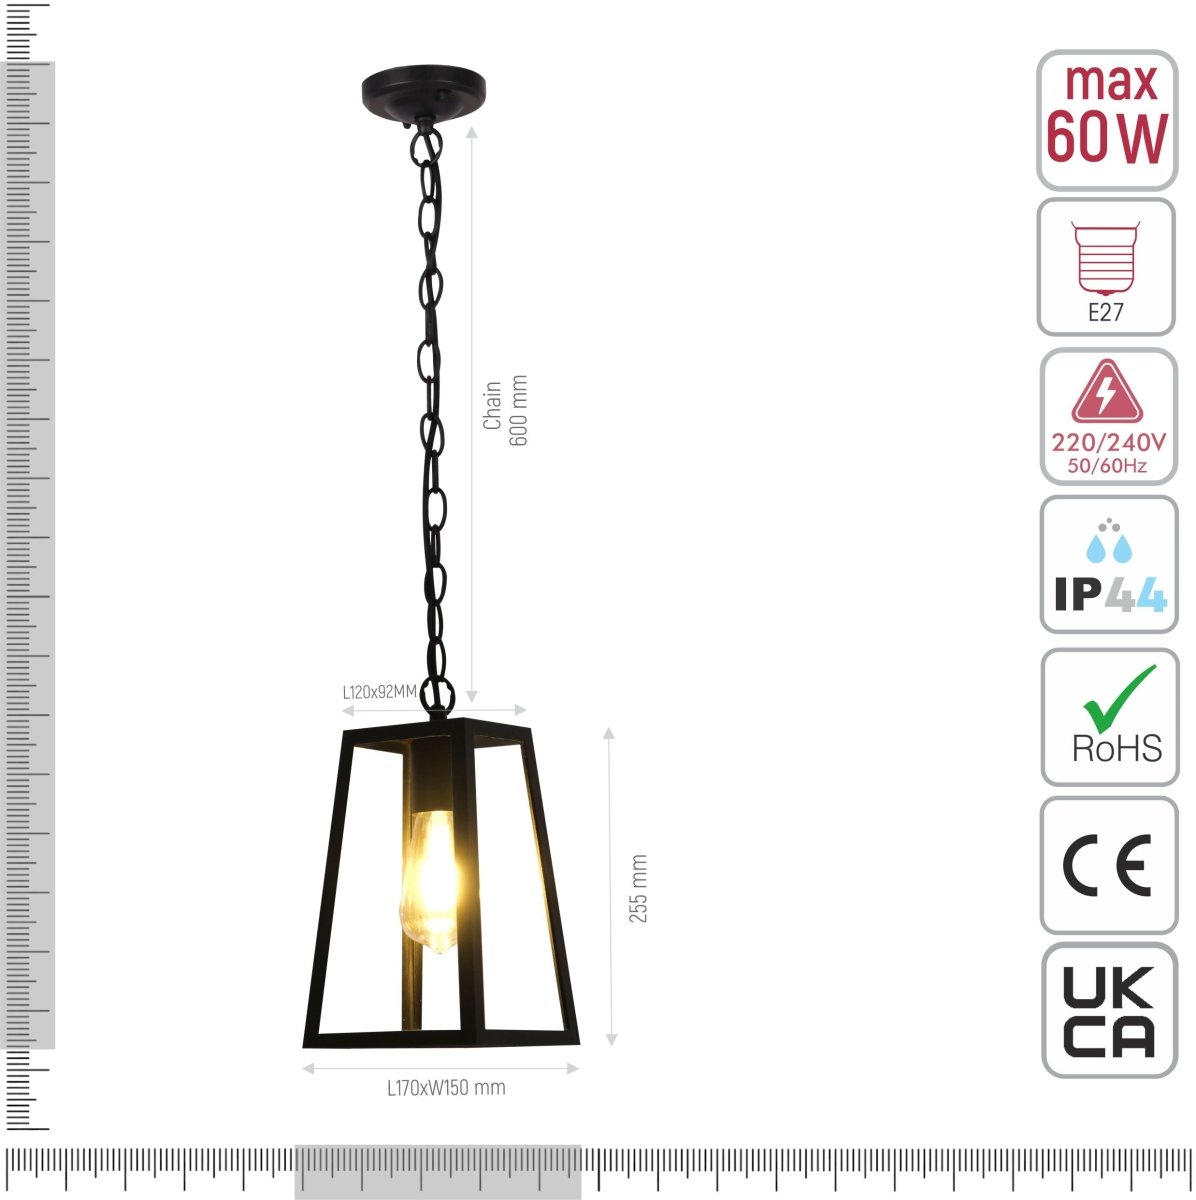 Technical specifications and measurements for Trapezoidal Pendant Ceiling Lamp Matt Black Clear Glass E27